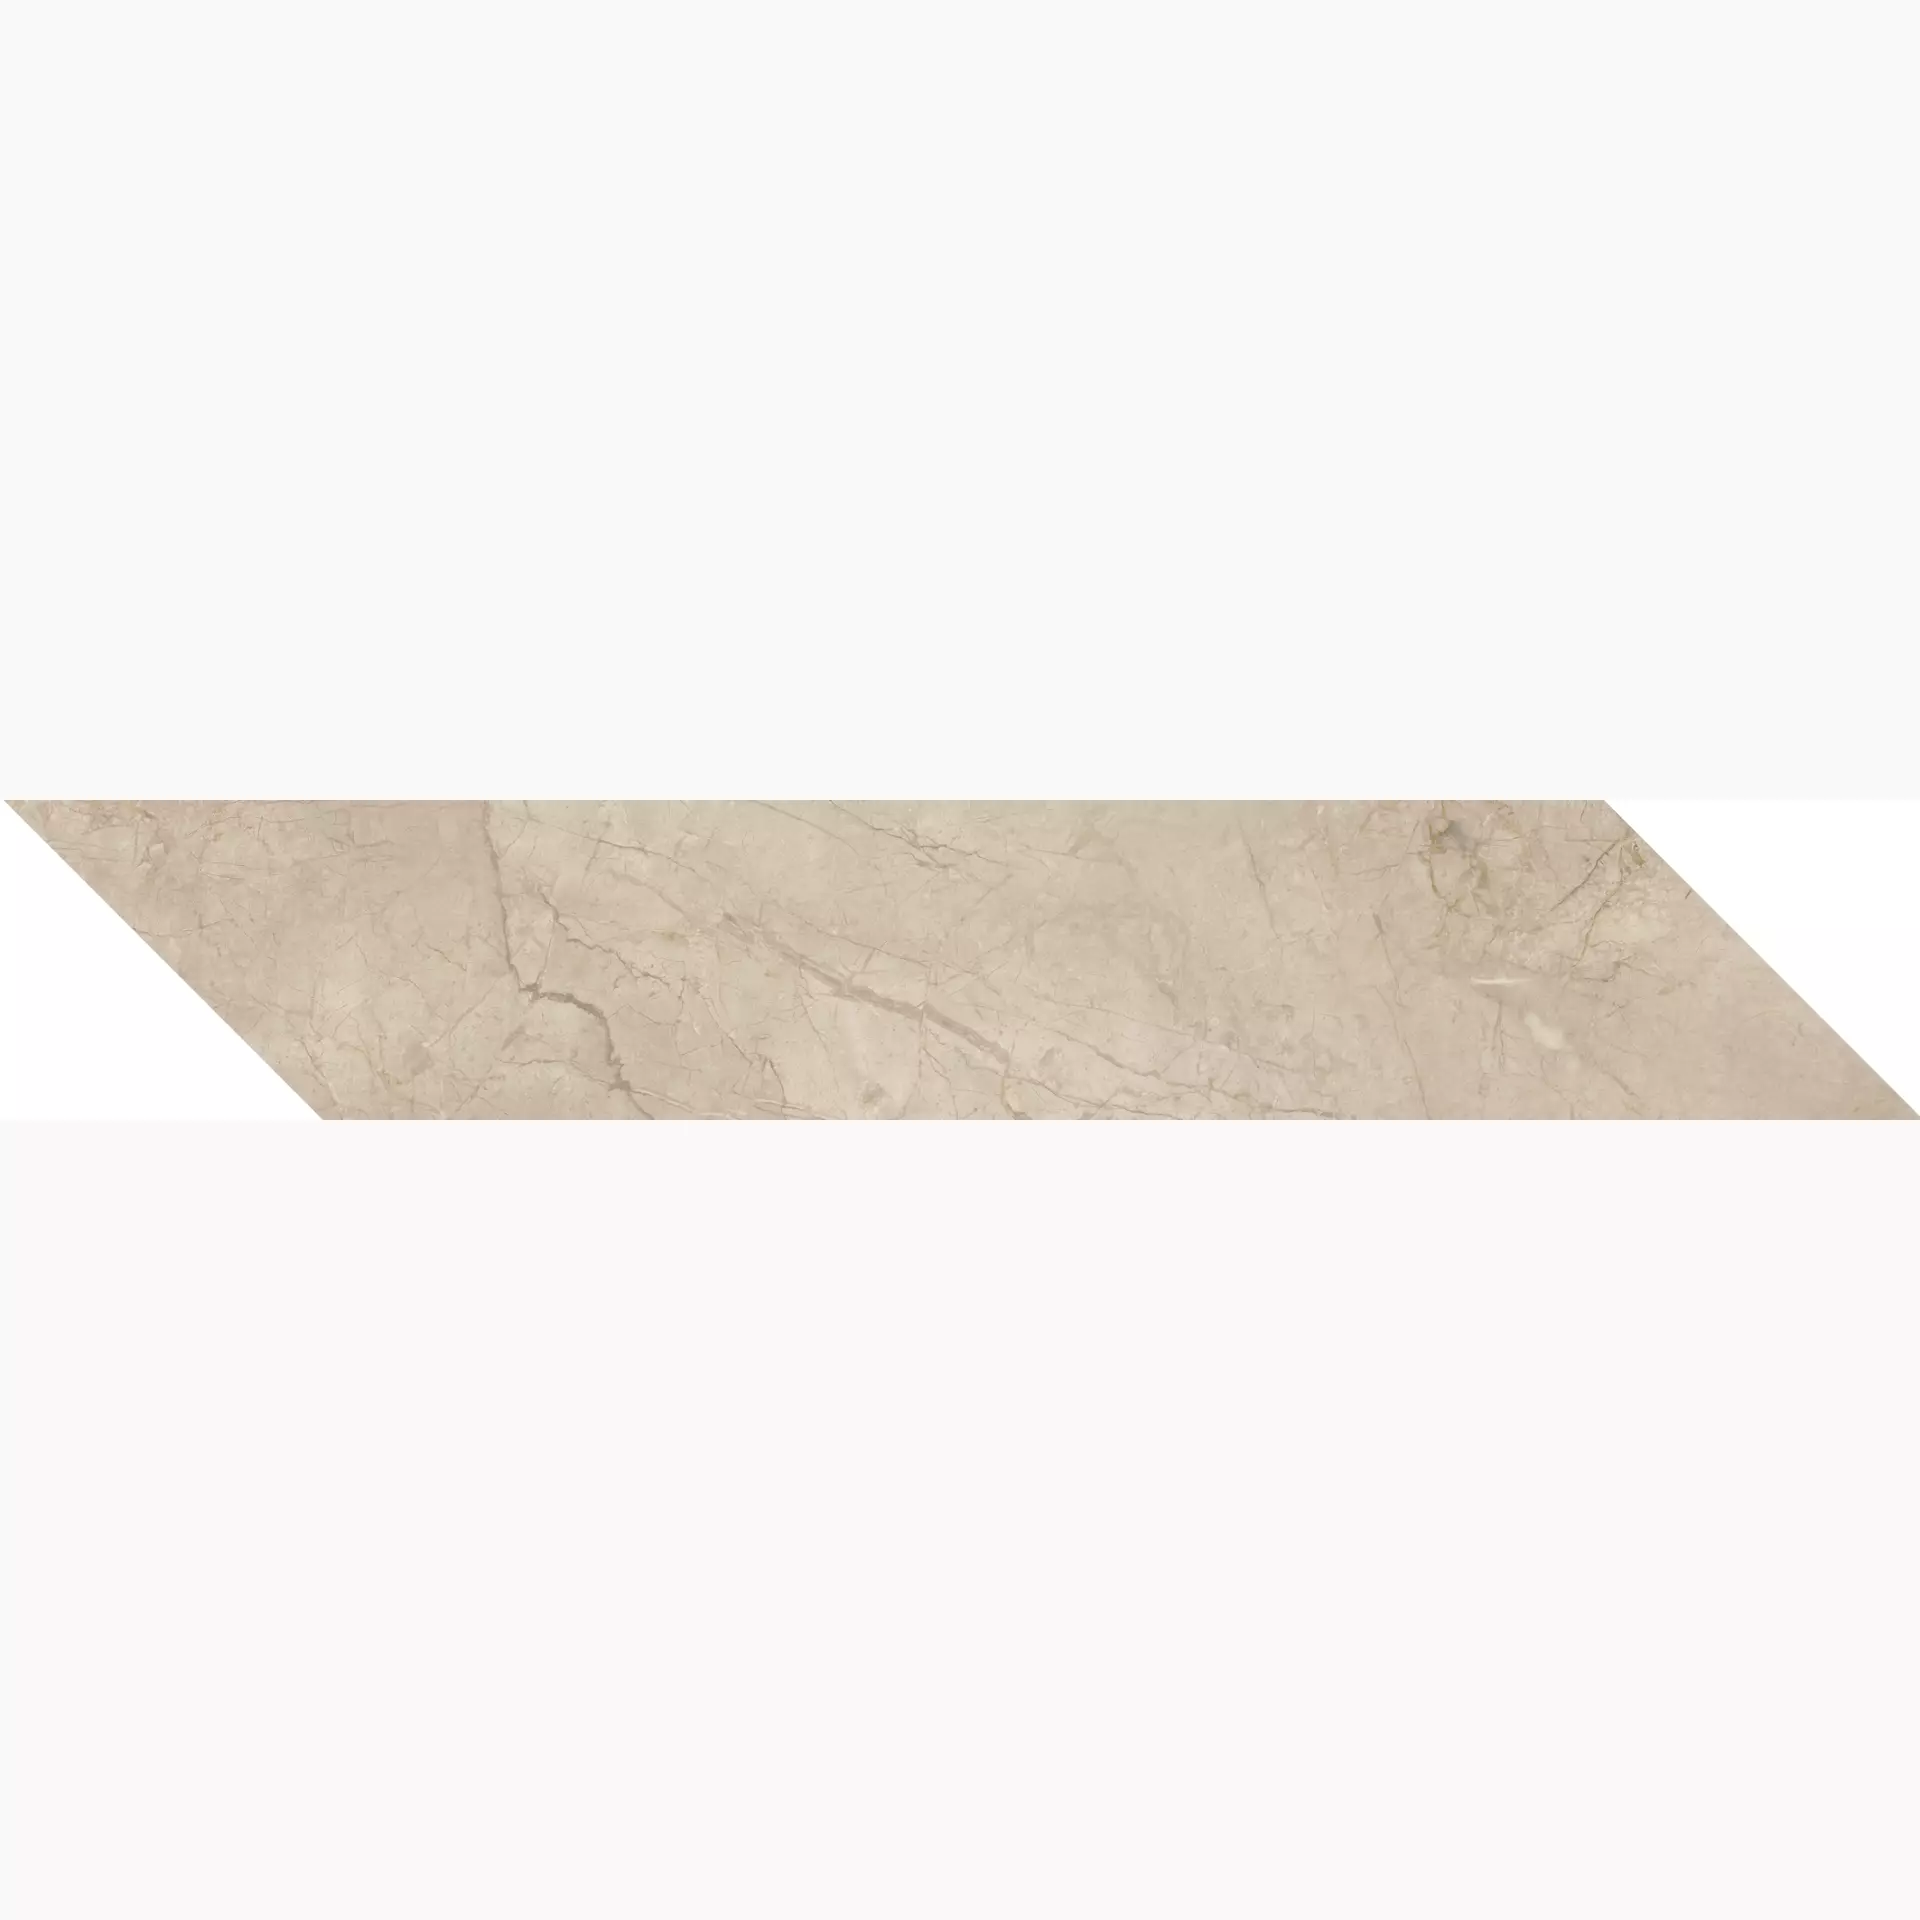 Keope Elements Lux Crema Beige Lappato Chevron Left 54334132 10x60cm rectified 9mm